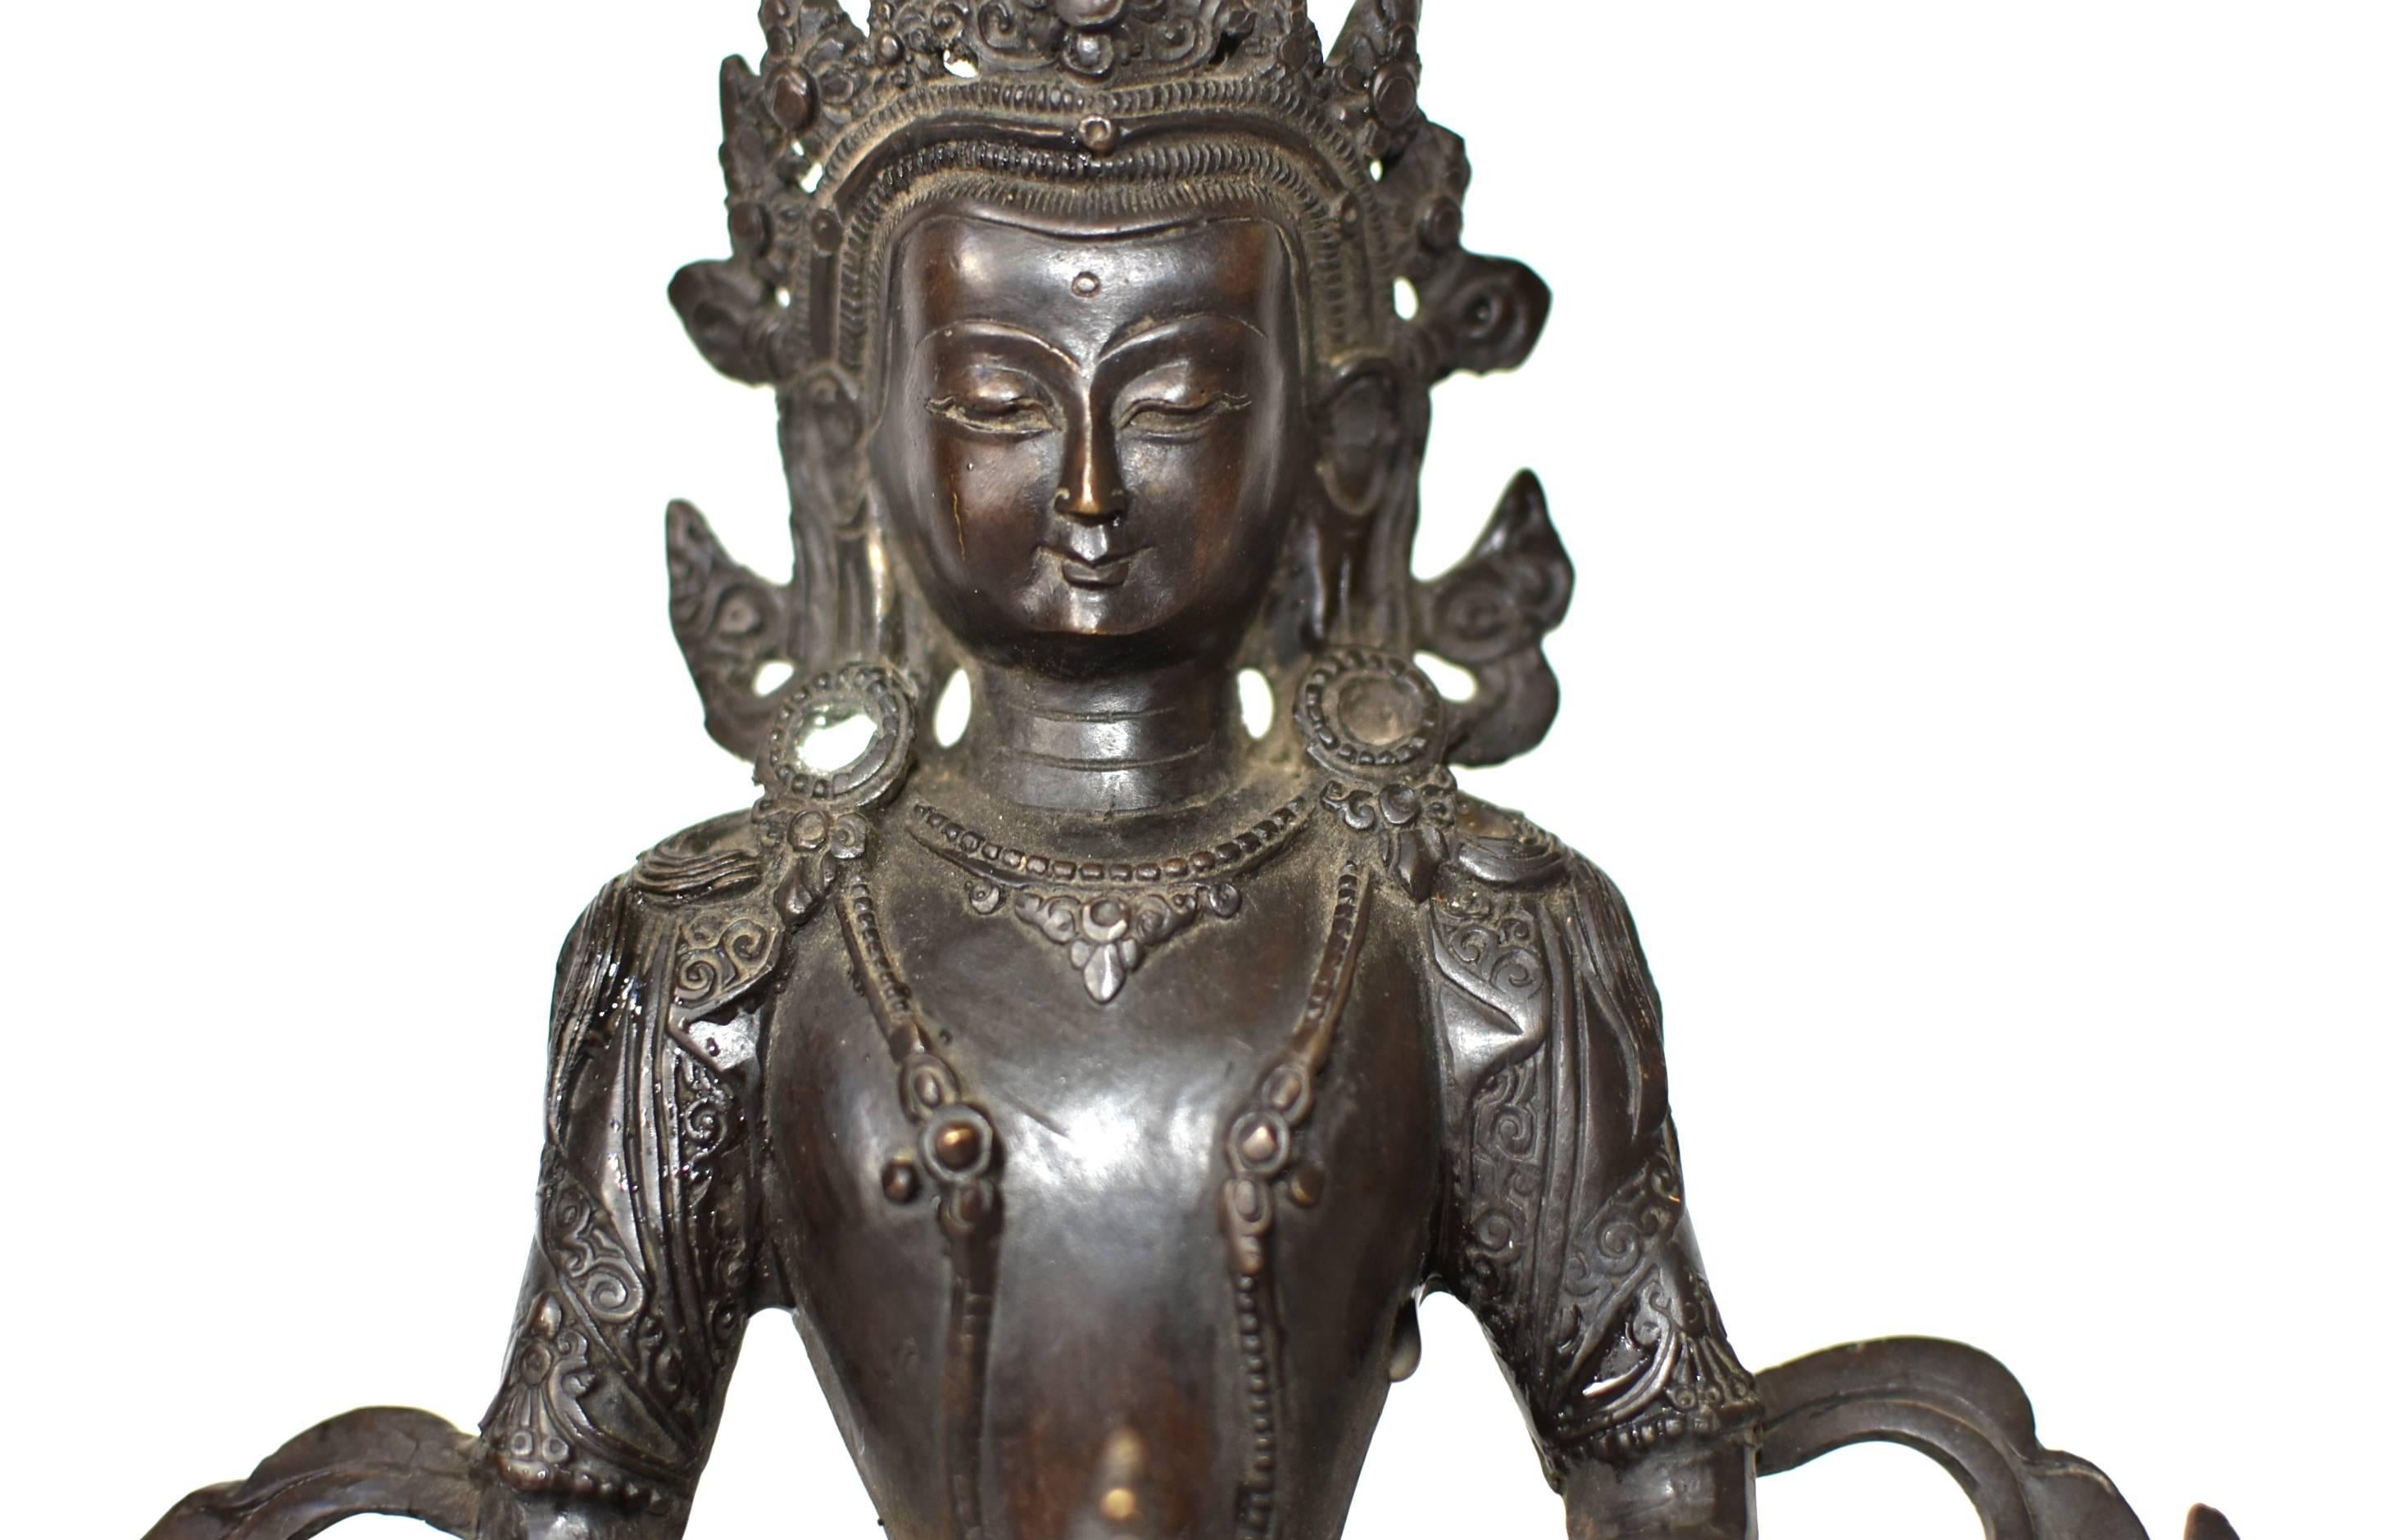 A beautiful bronze sculpture of The Tibetan Amitayus, the Bodhissatva/Buddha of infinite life, a tantric for of Amitabha, the Buddha of Infinite Light. 
Adorned with necklaces, crown and sashes decorated with rosettes, pearls and medallions, Buddha